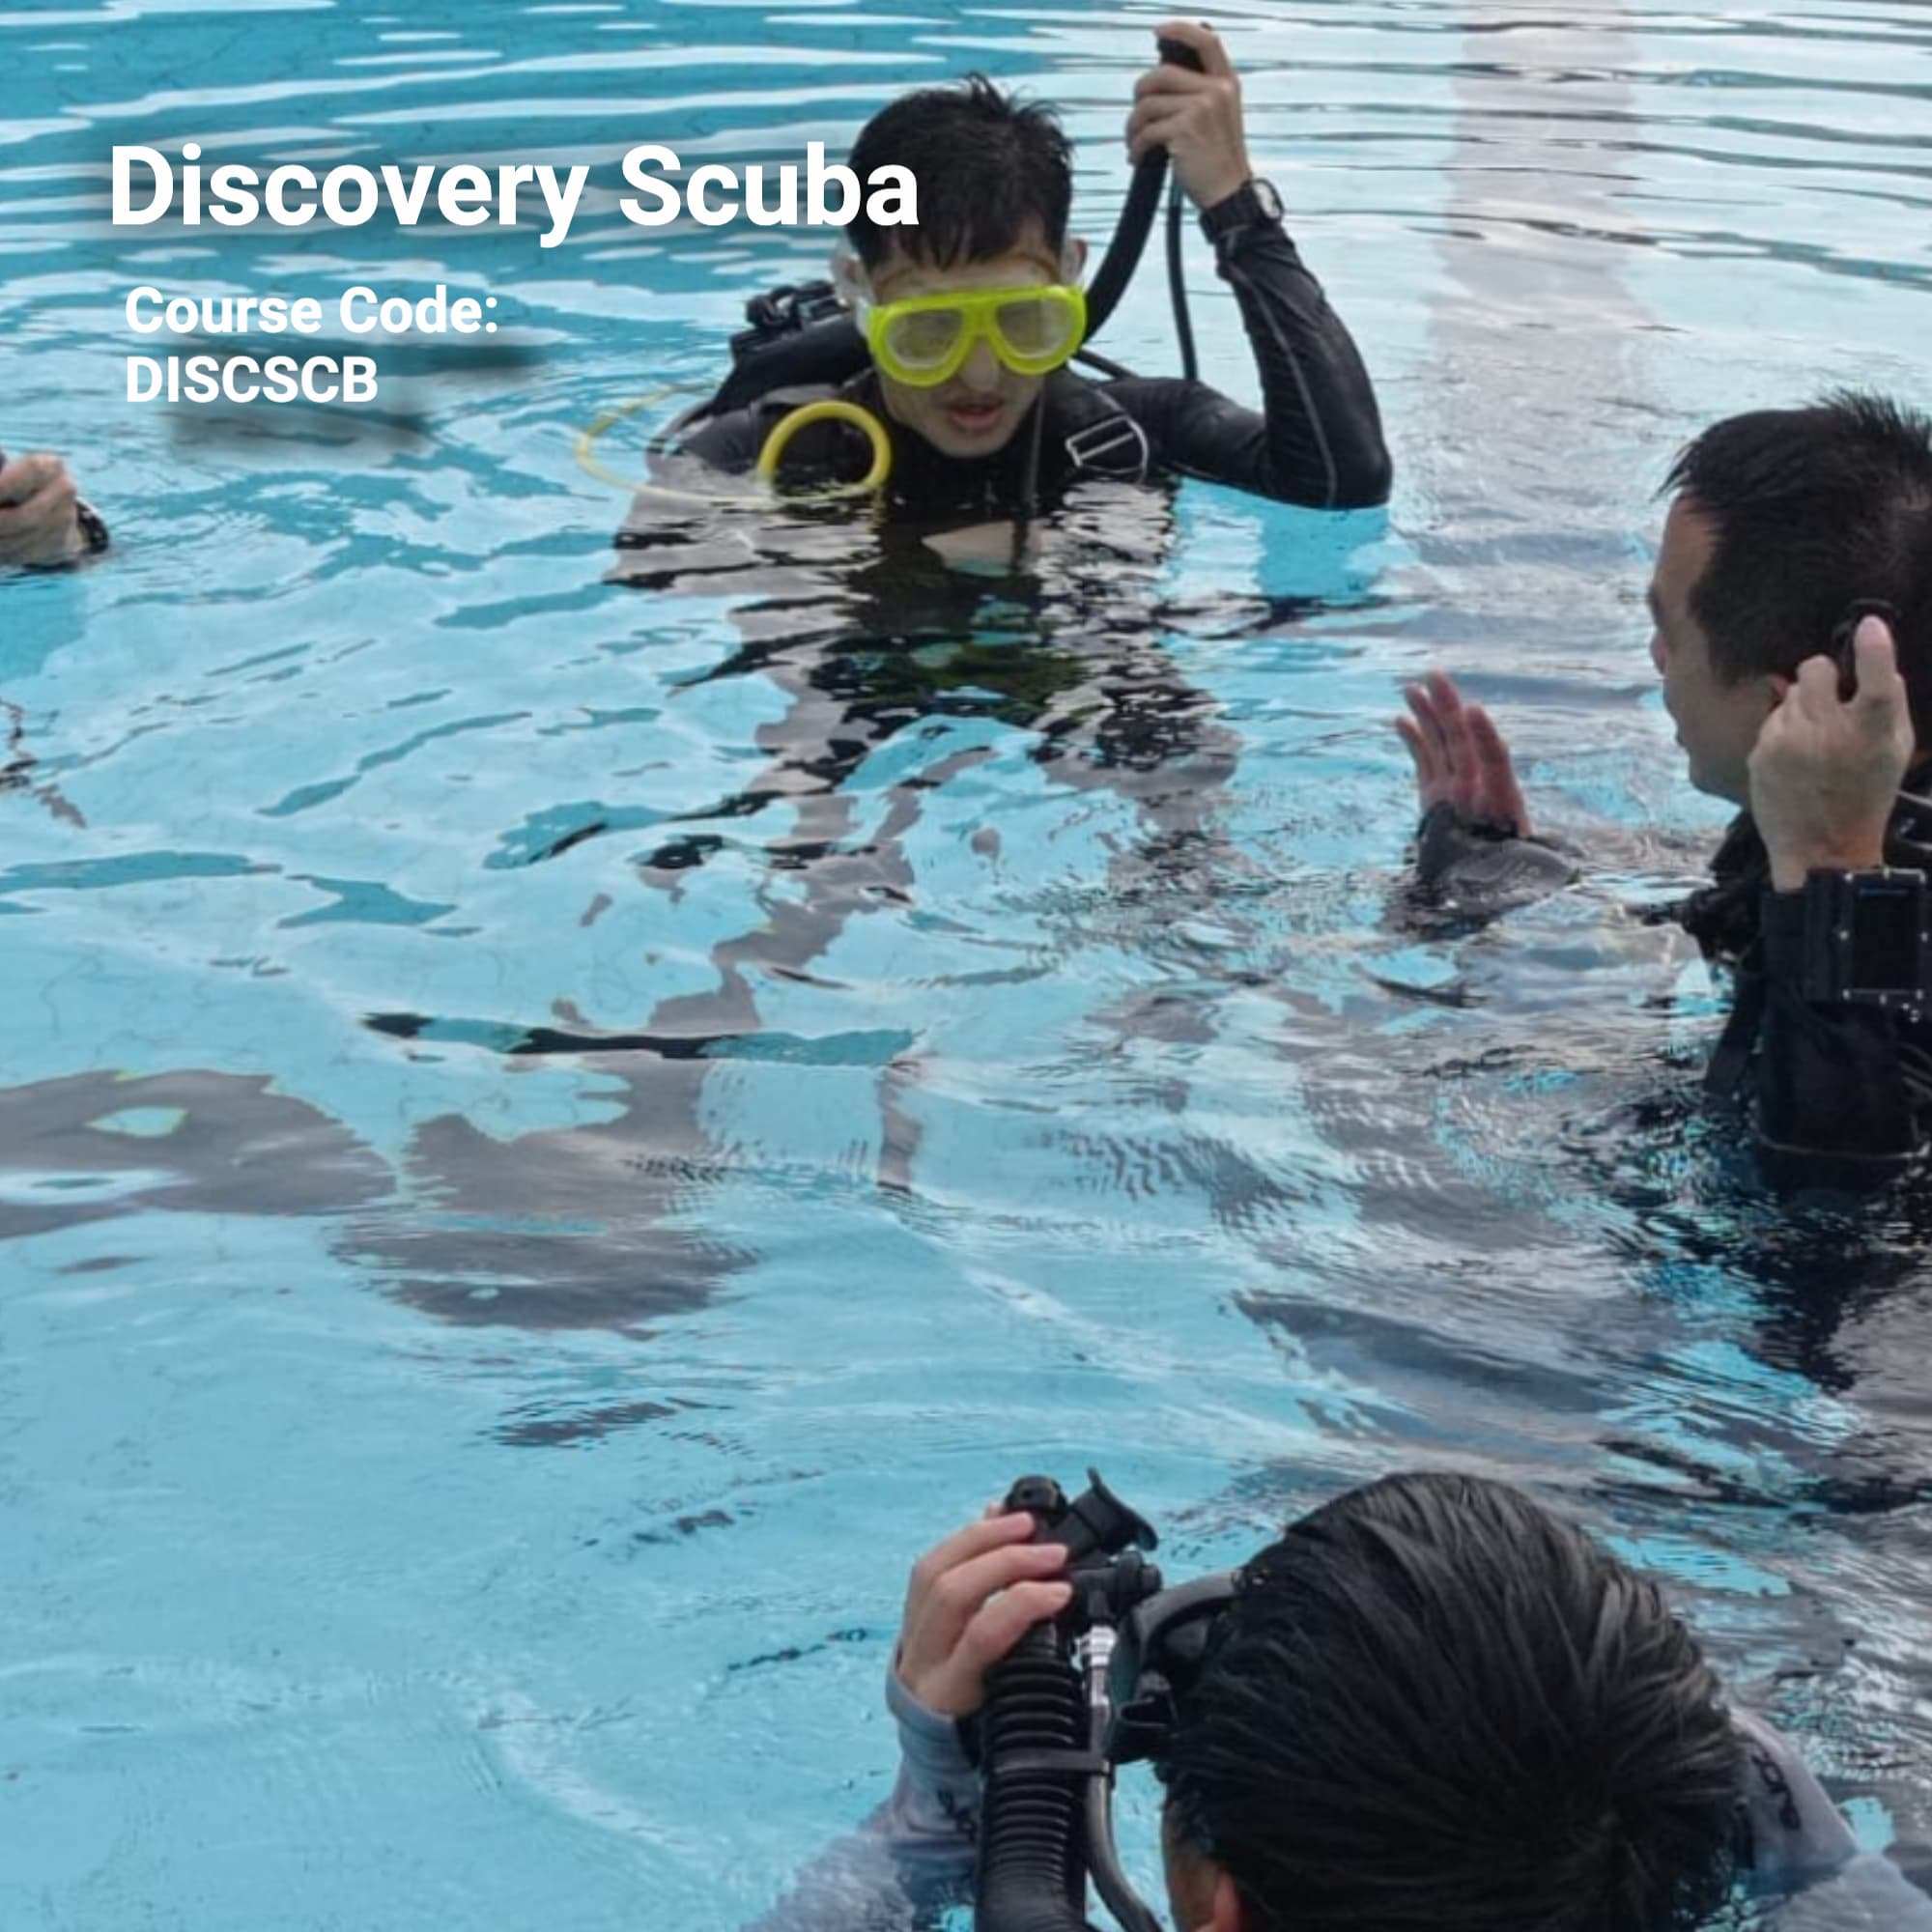 Image of Discovery Scuba Course